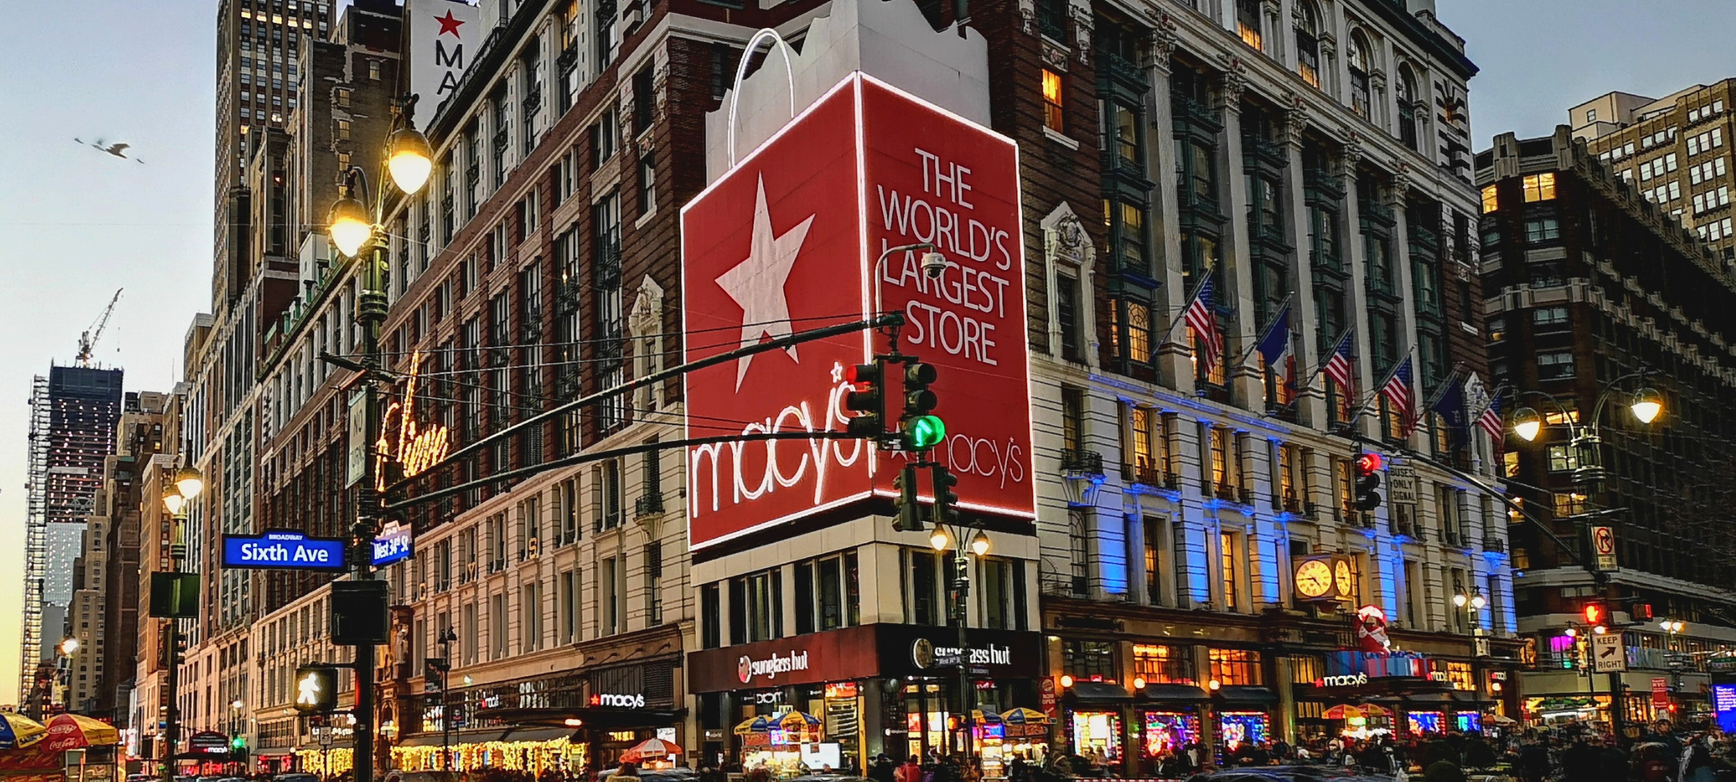 Large Macy's store